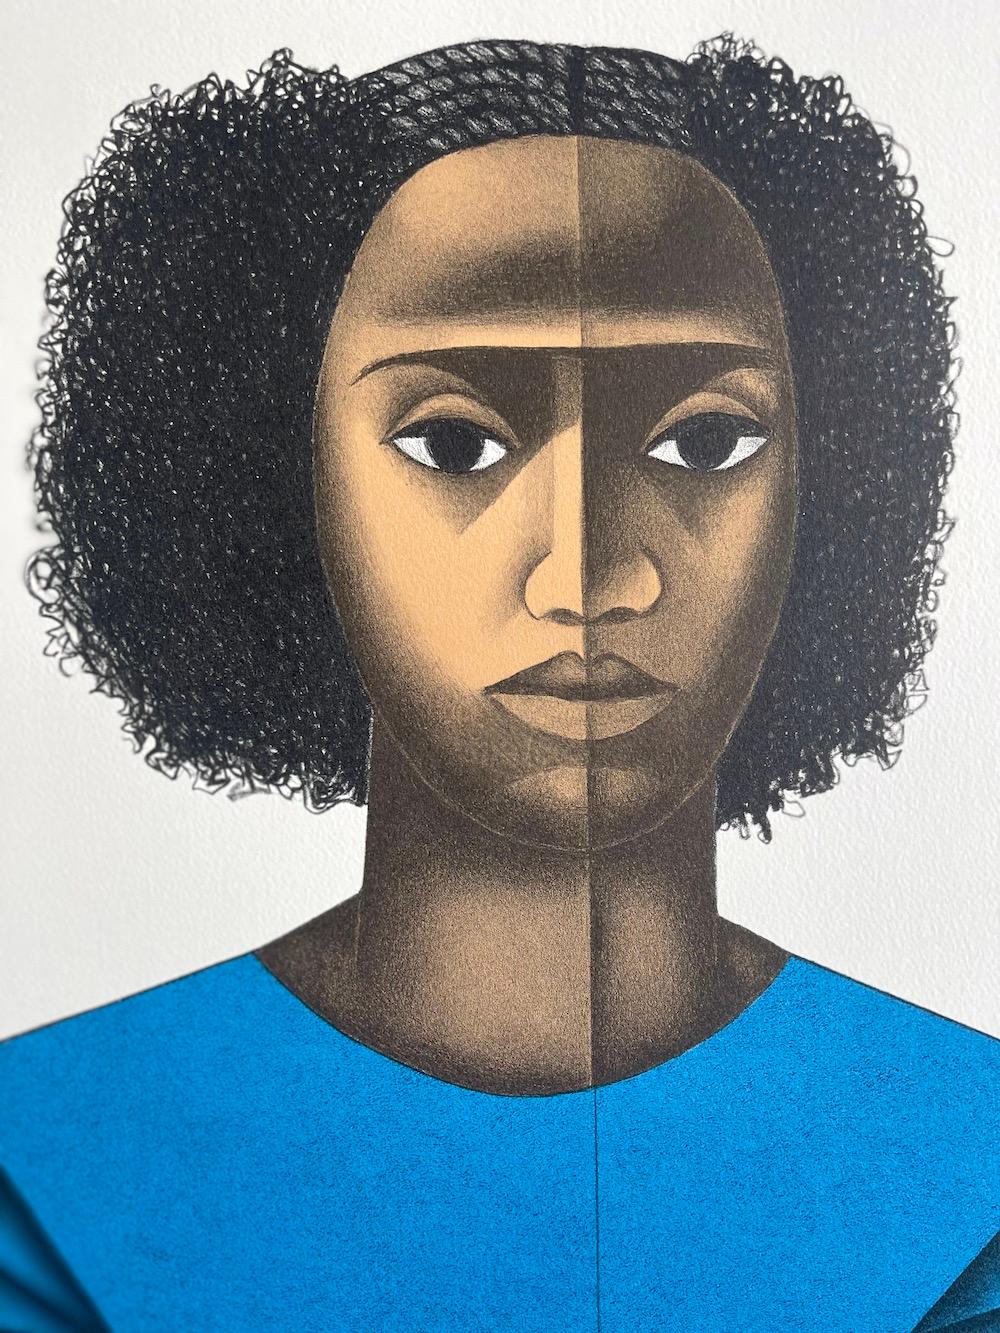 KEISHA M. Hand Drawn Lithograph, Young Black Female Portrait, Afro Hairstyle - Print by Elizabeth Catlett